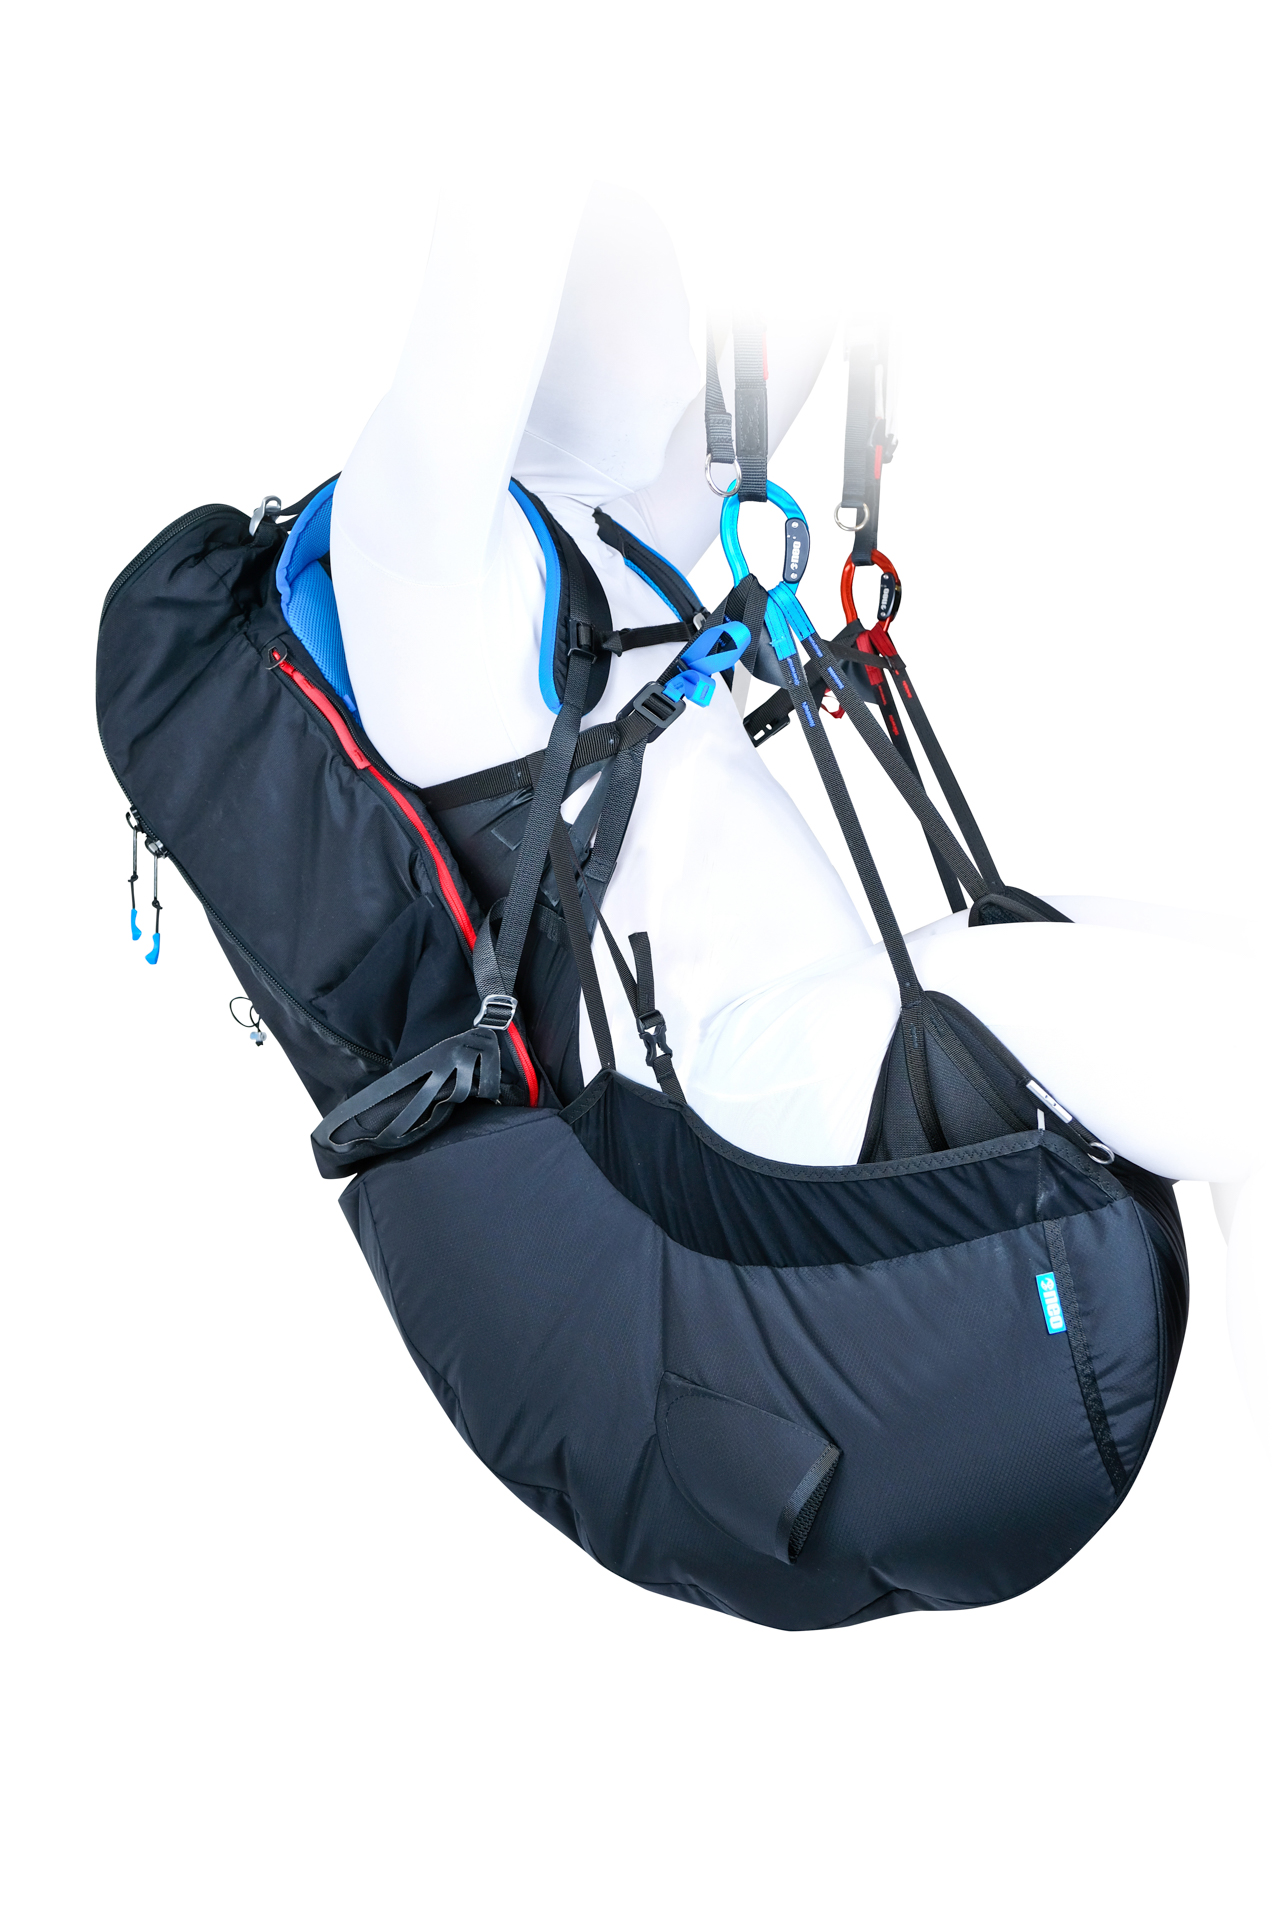 NEO Shorty Airbag